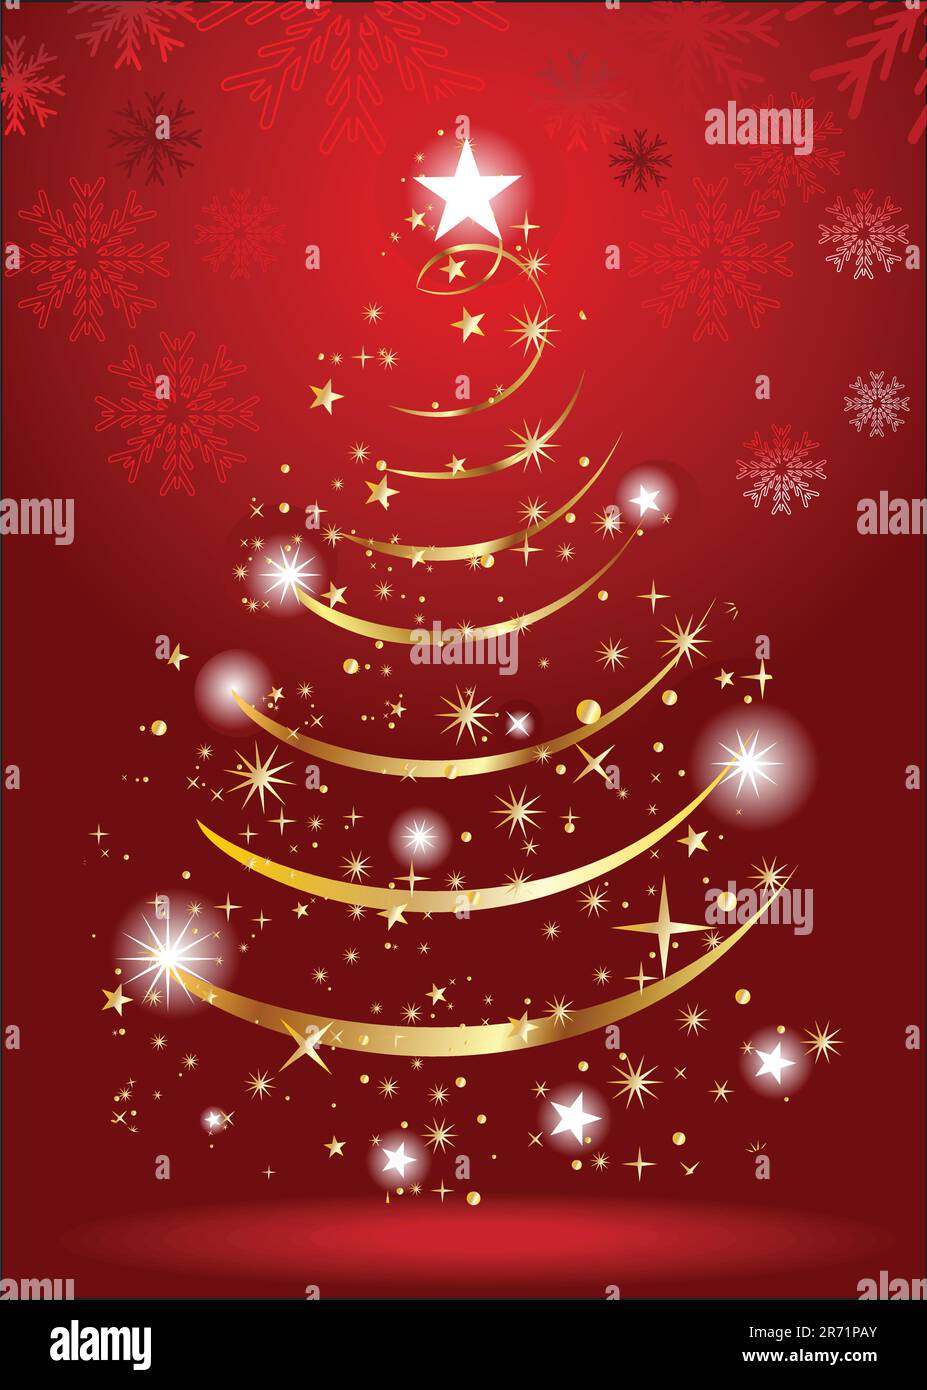 abstract christmas tree with gold color vector illustration Stock Vector